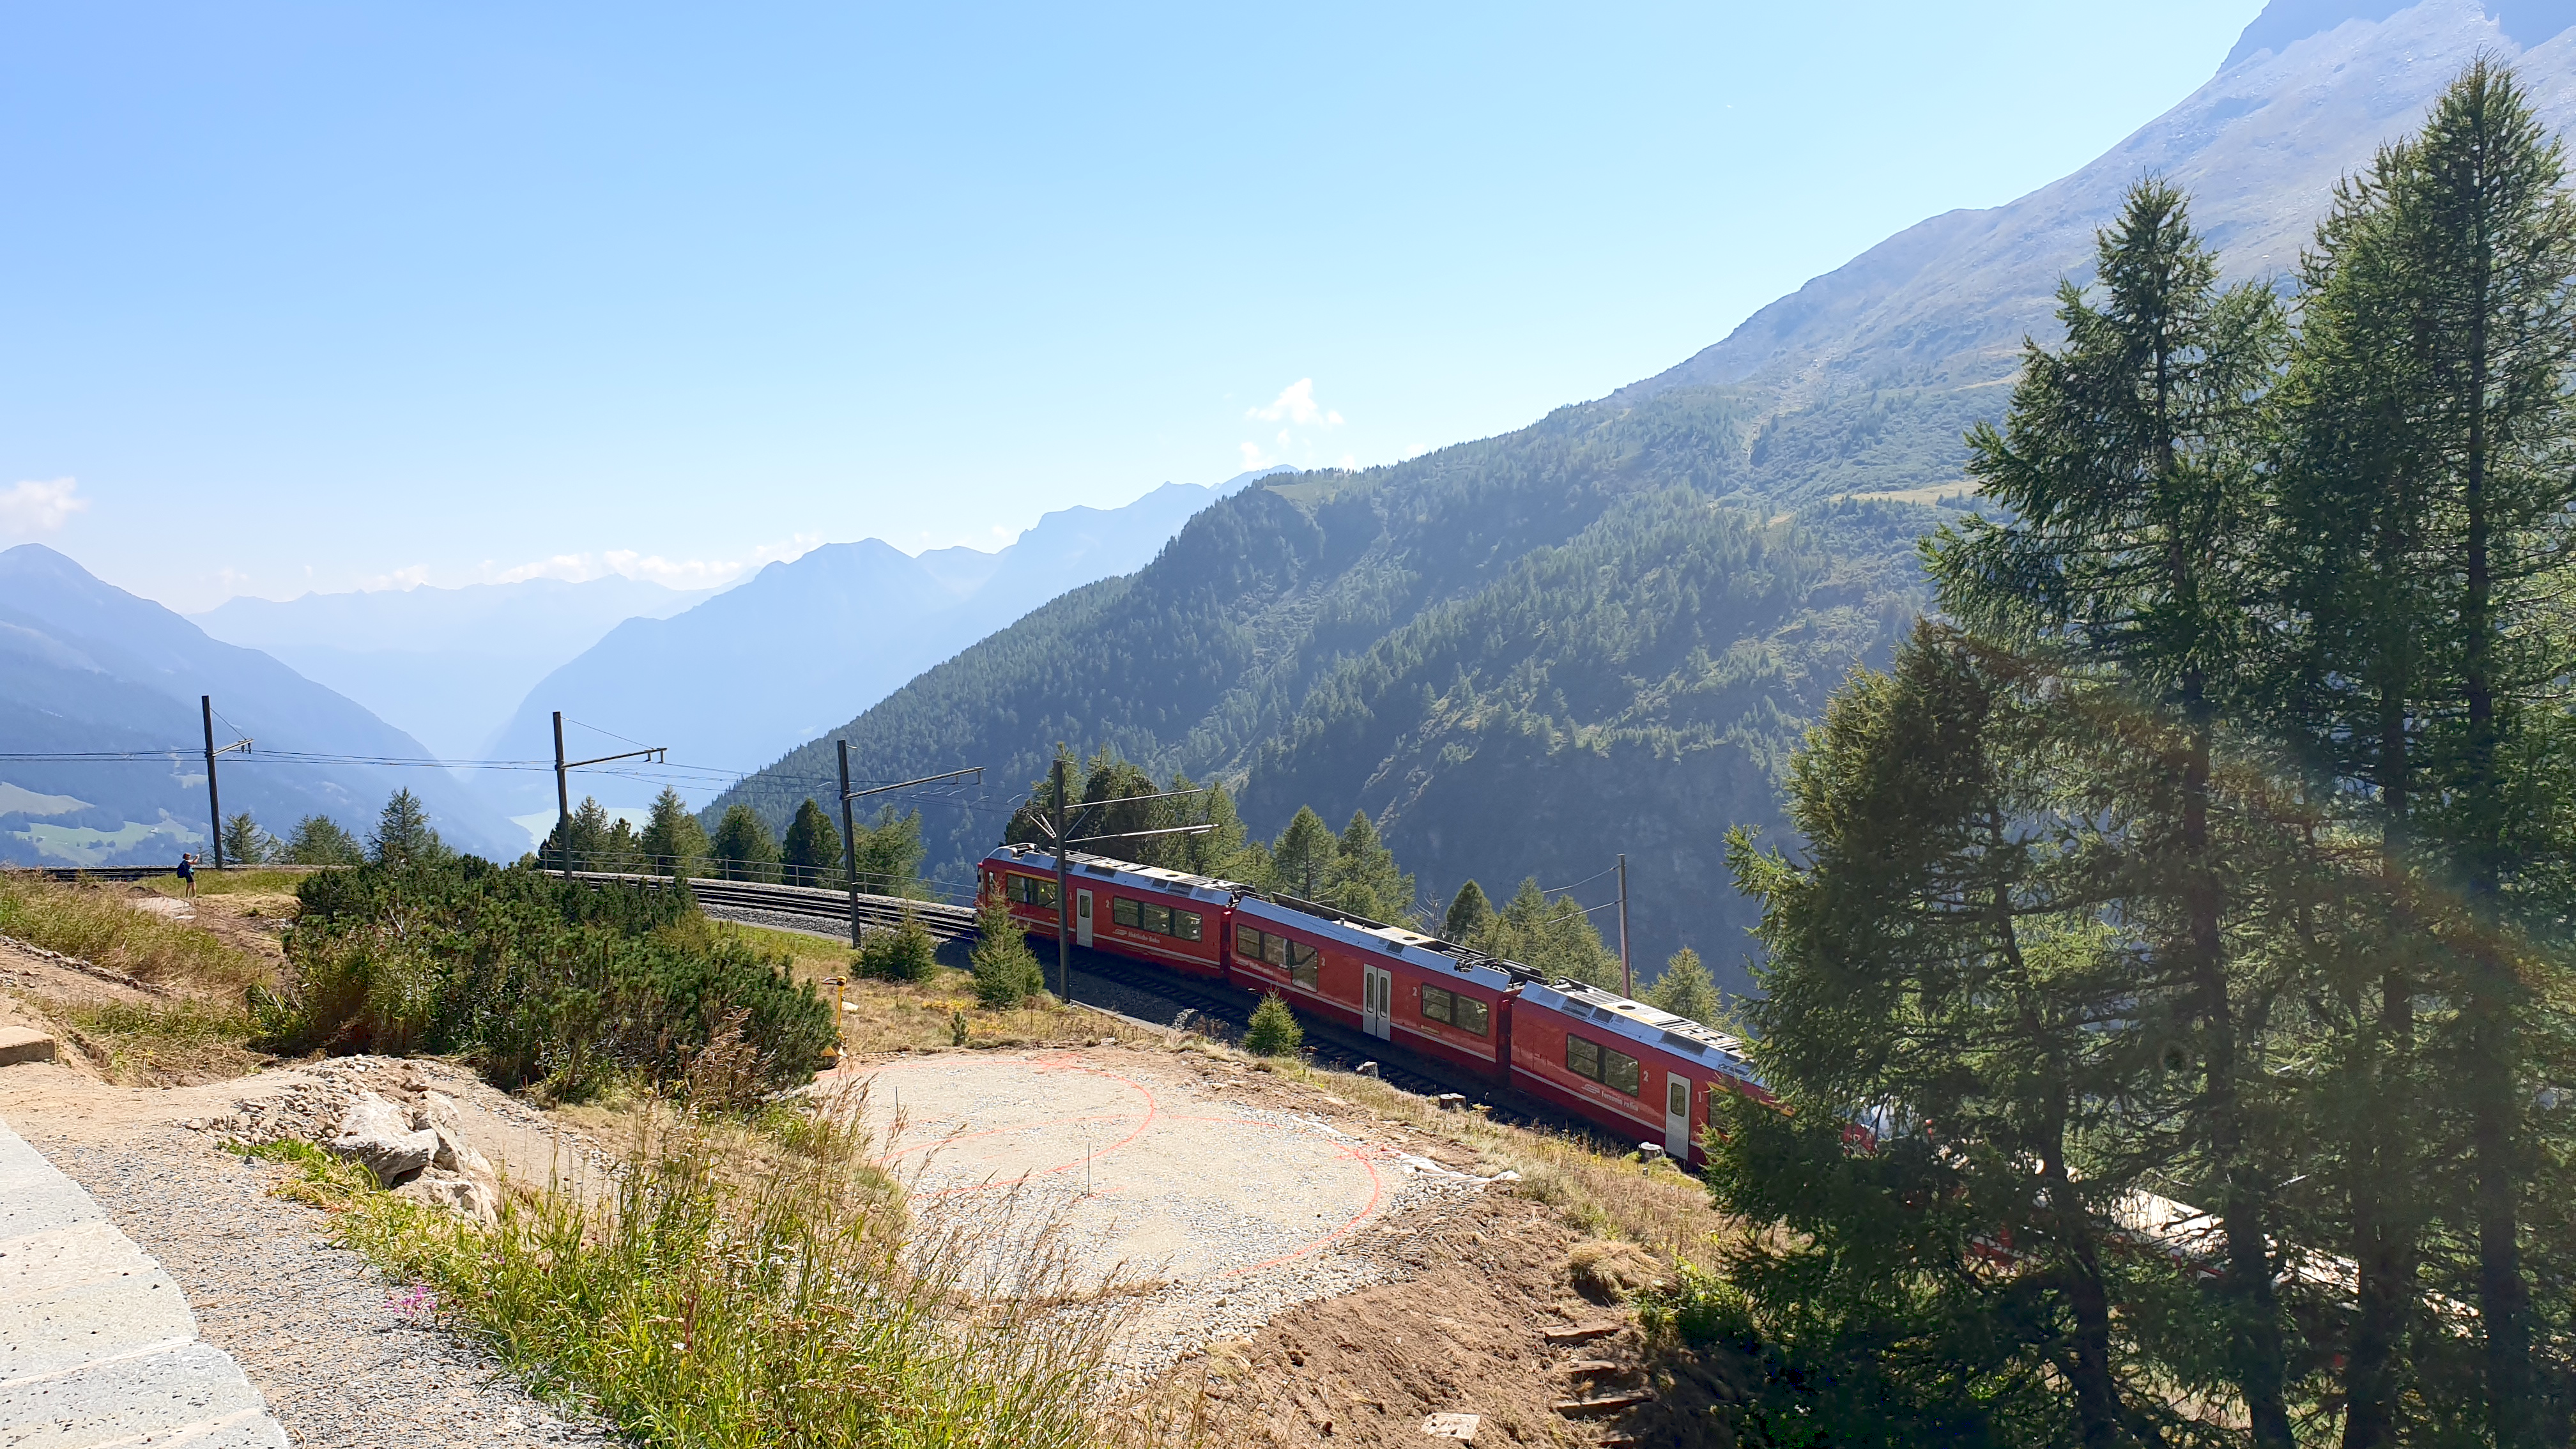 Red Swiss train against a majestic mountain backdrop.